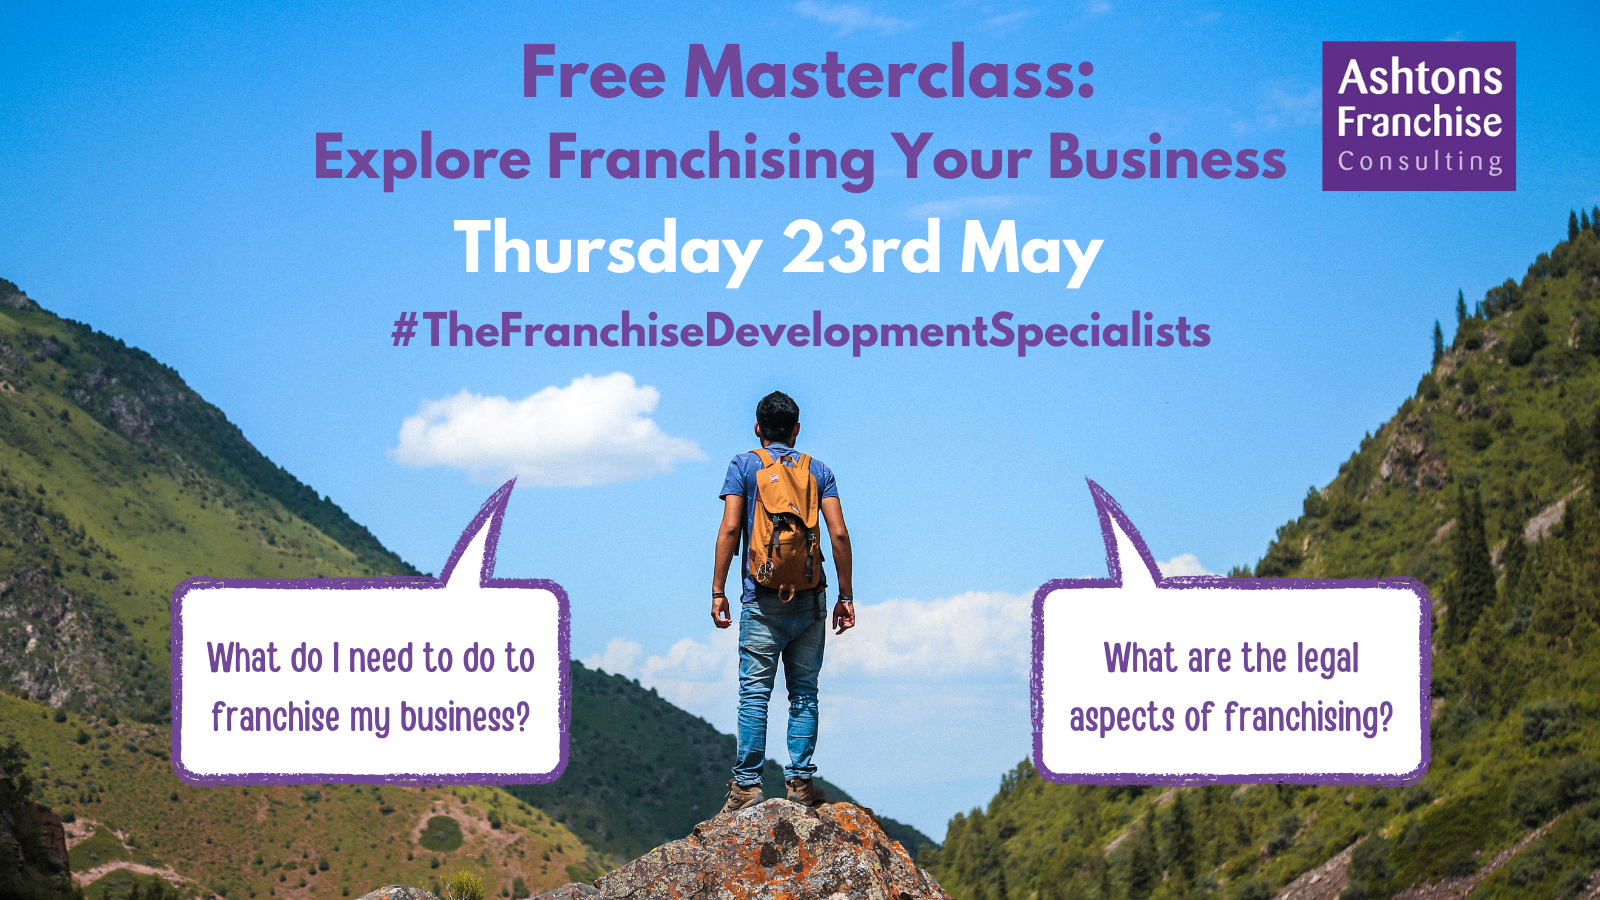 Franchise your business